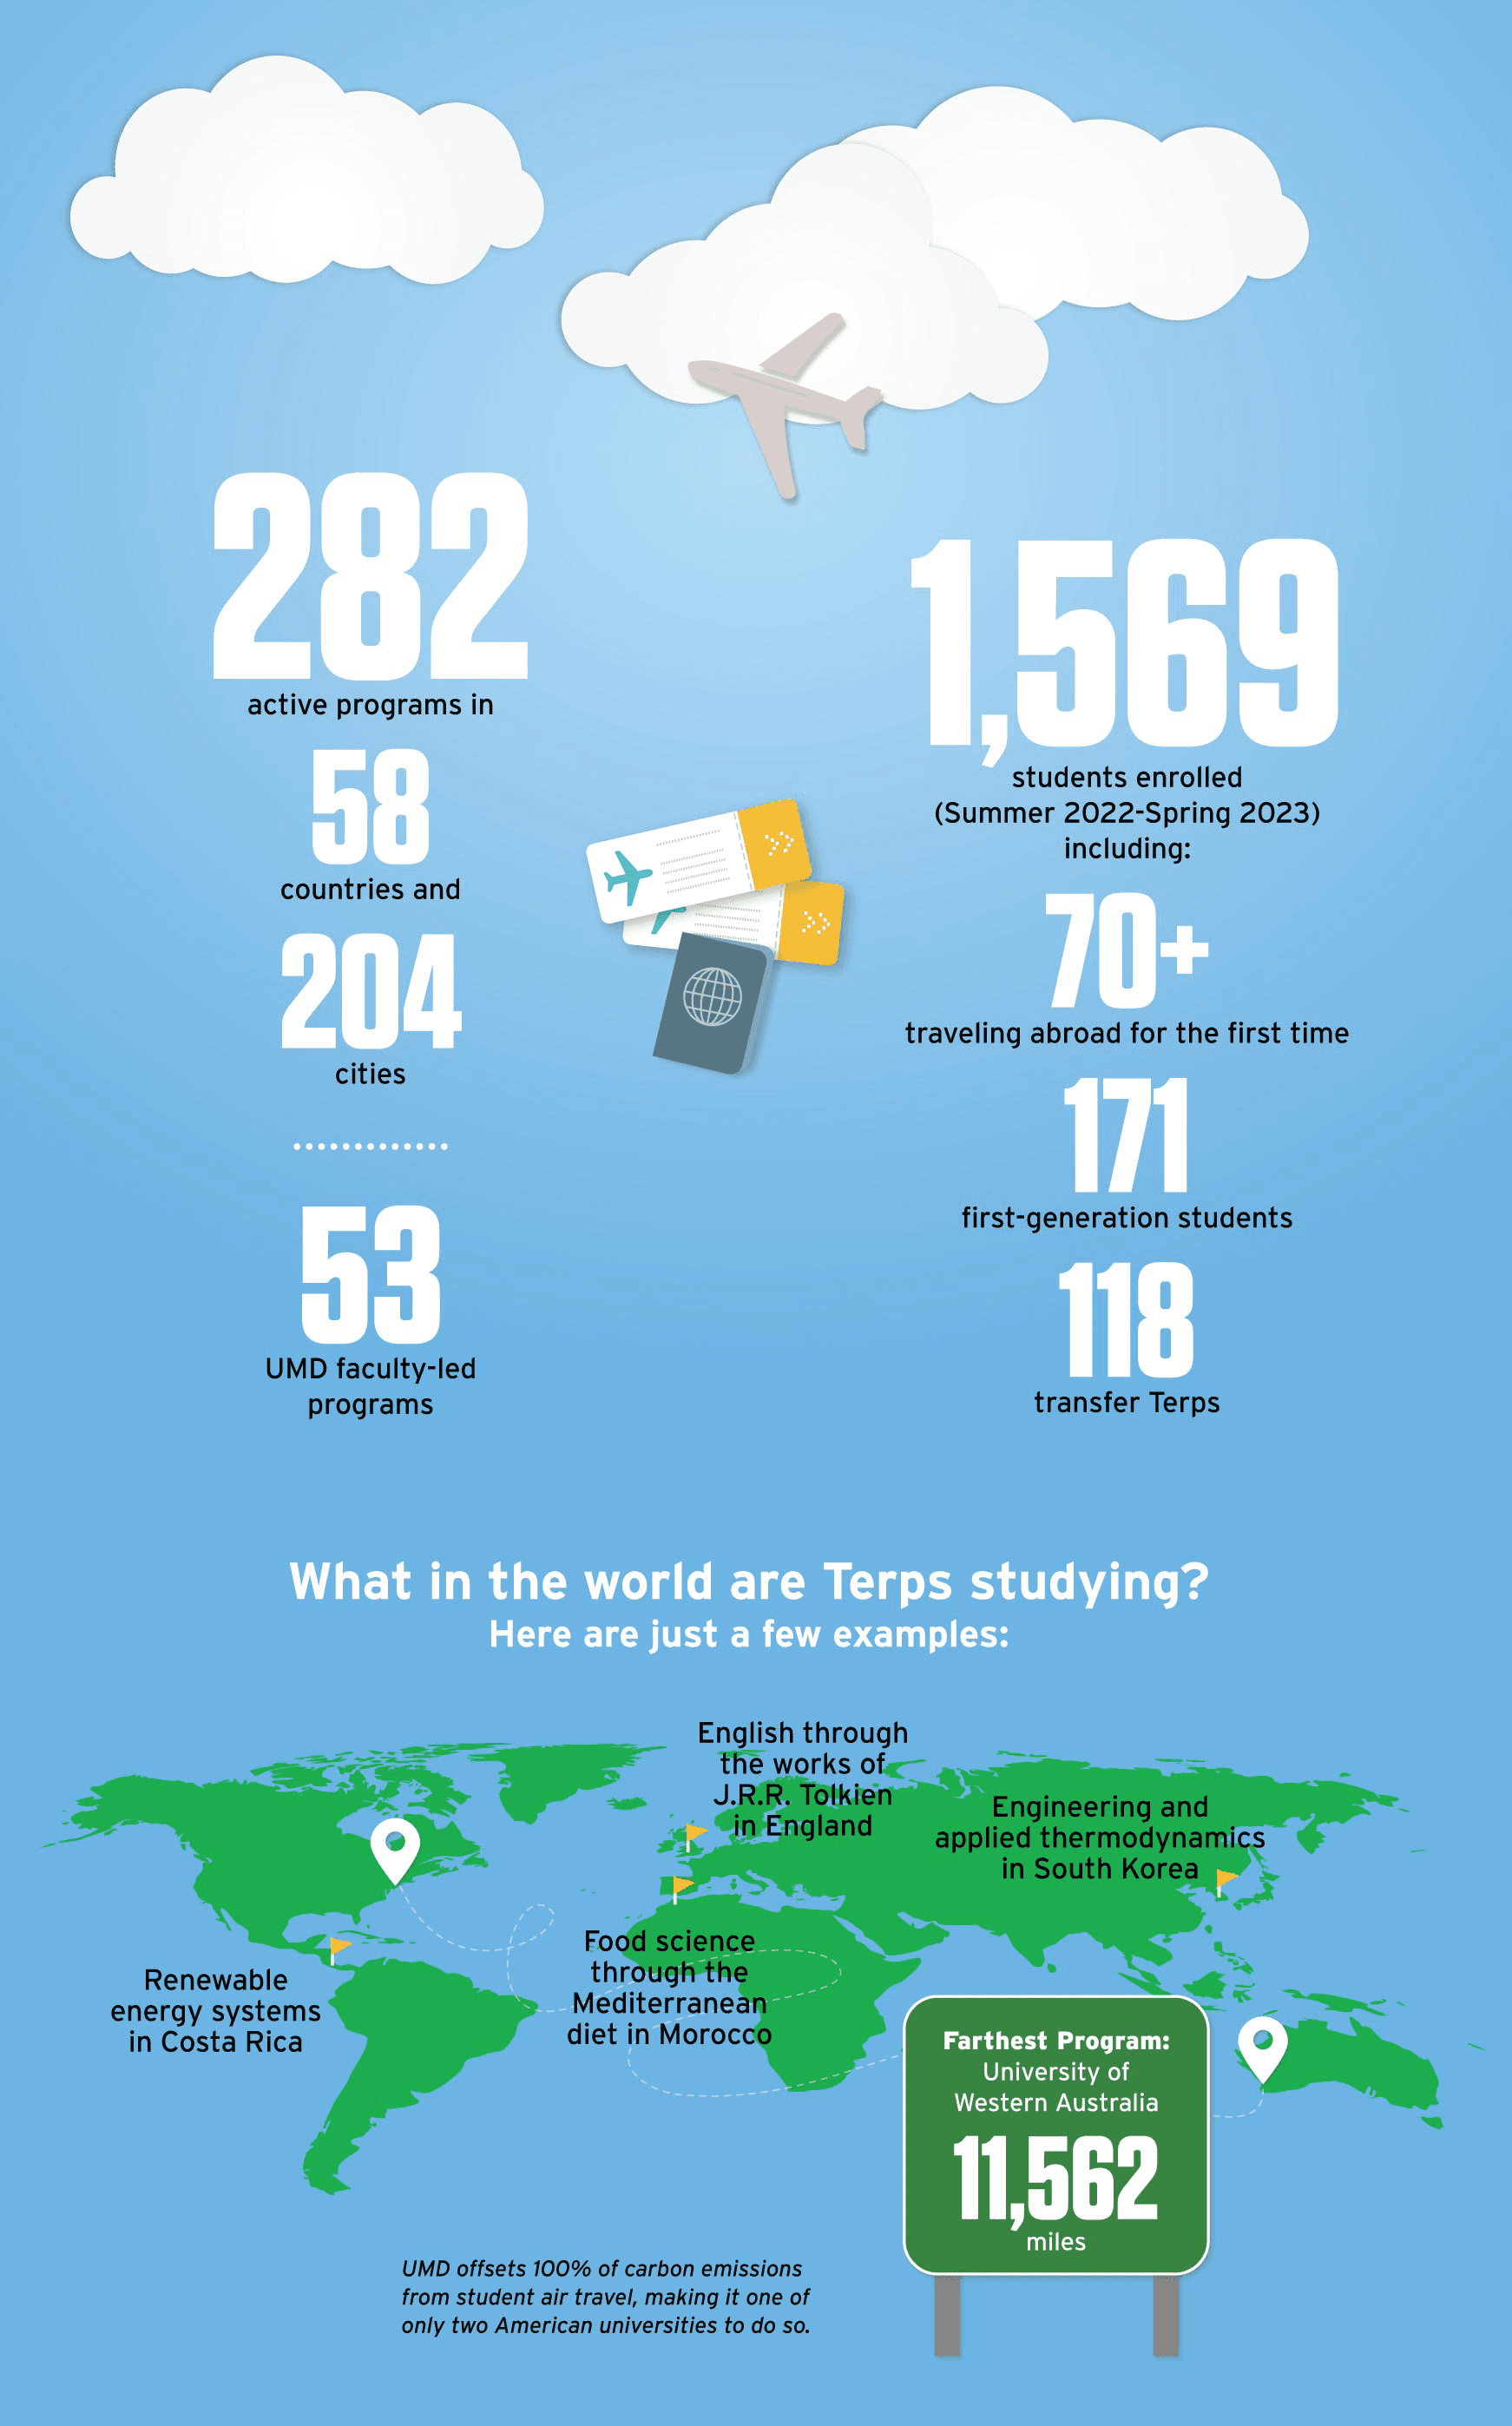 Infographic: 282 active programs in 58 countries and 204 cities. 53 UMD faculty-led programs. 1,569 students enrolled (Summer 2022-Spring 2023) including: 70+ traveling abroad for the first time, 171 first-generation students, 118 transfer Terps. What in the world are Terps studying? Here are just a few examples: Renewable energy systems in Costa Rica. Food science through the Mediterranean diet in Morocco. English through the works of J.R.R. Tolkien in England. Engineering and applied thermodynamics in South Korea. Farthest program: University of Western Australia, 11,562 miles. UMD offsets 100% of carbon emissions from student air travel, making it one of only two American universities to do so.